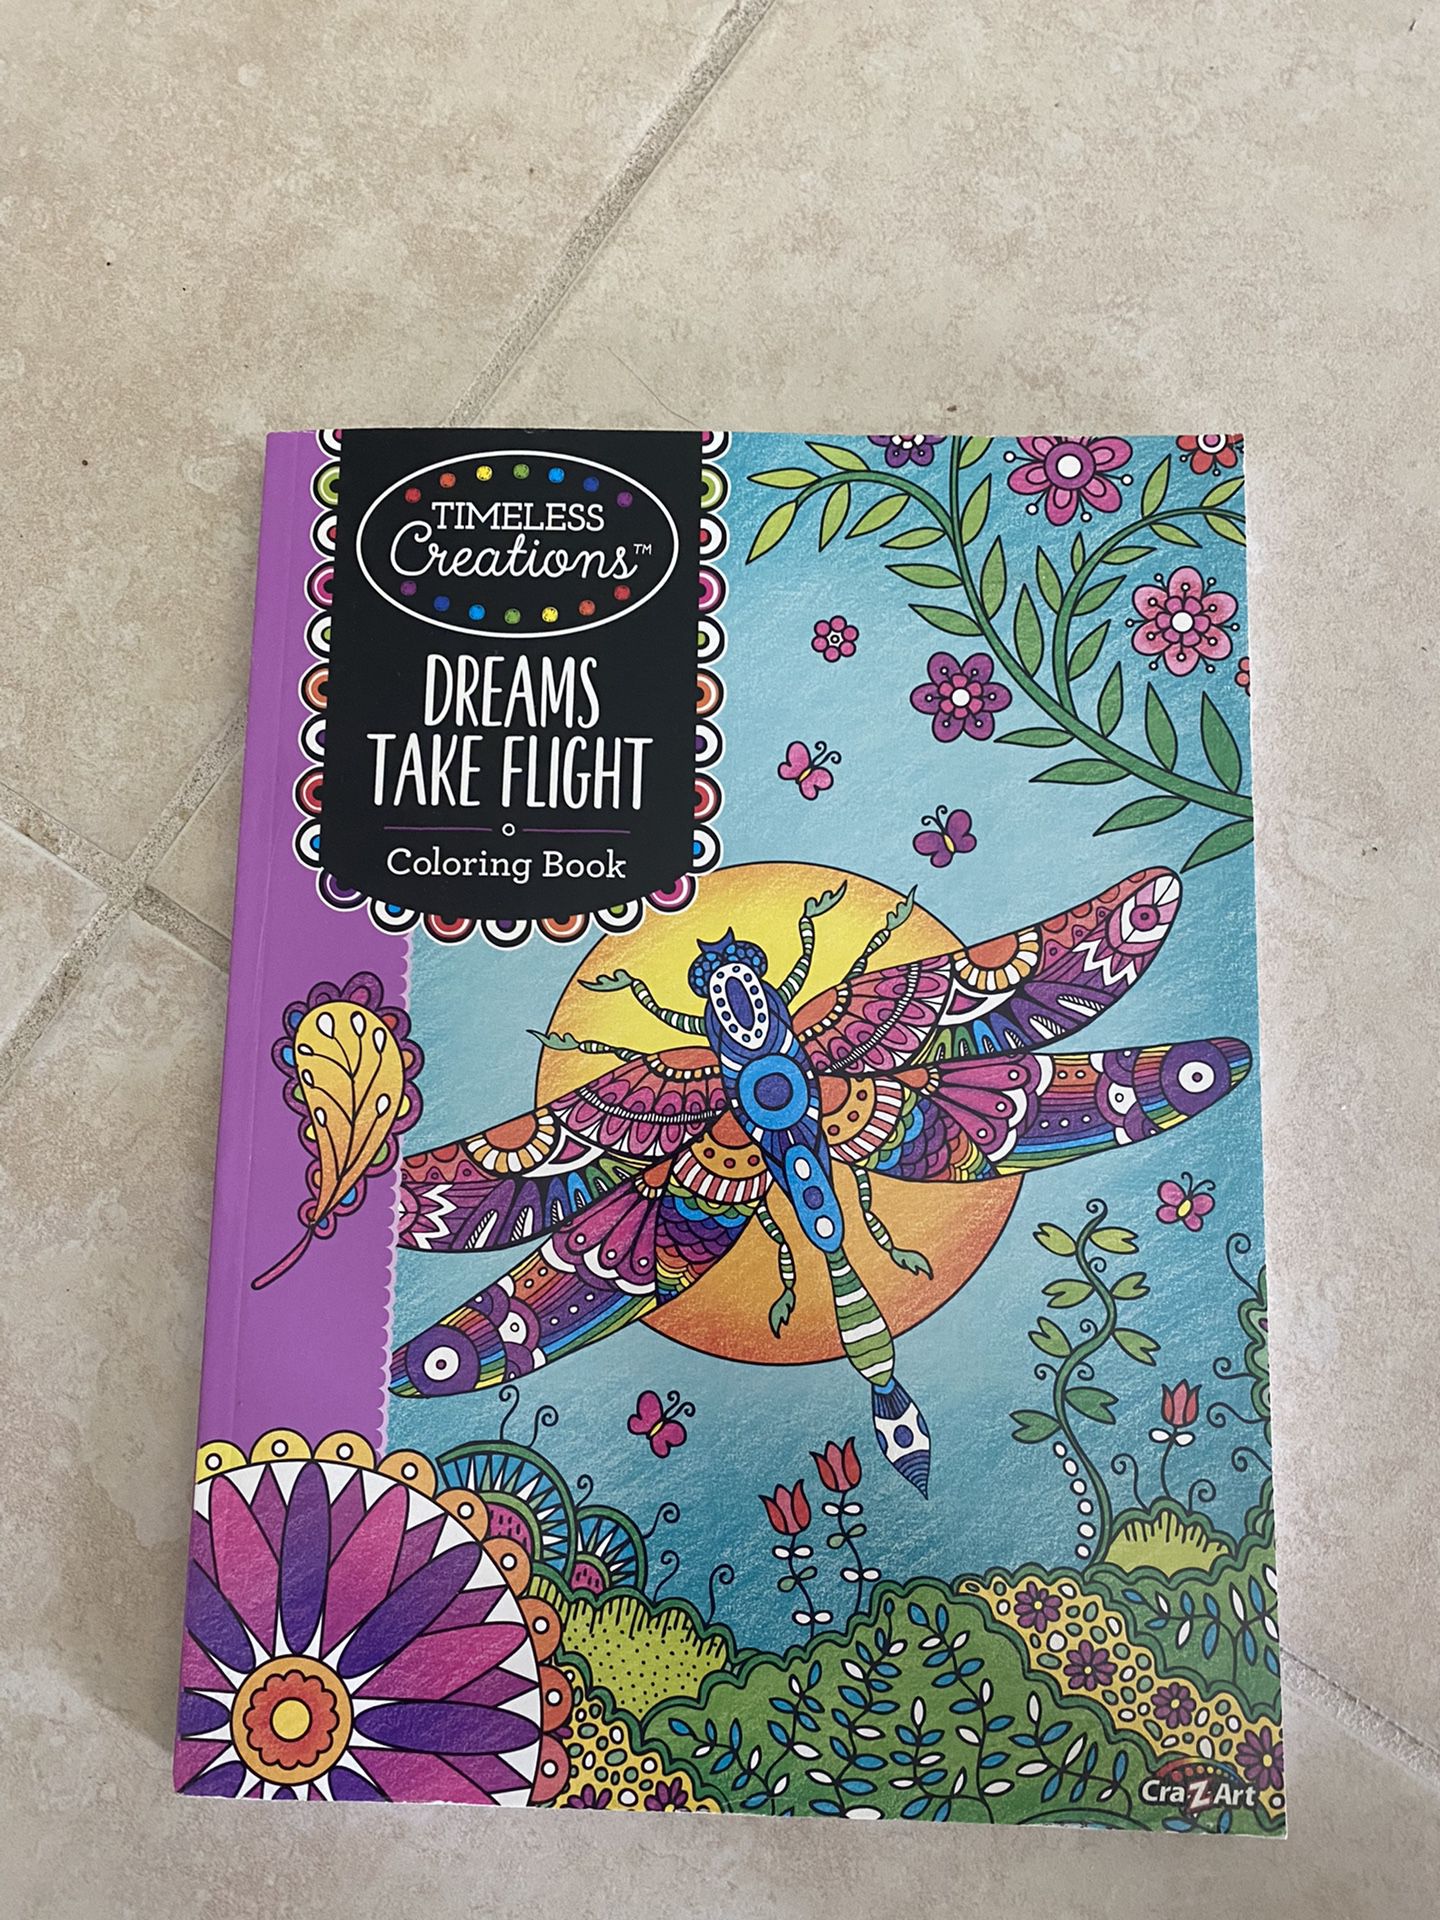 Cra-Z-art Timeless Creations Coloring Book, Dreams Take Flight, 64013